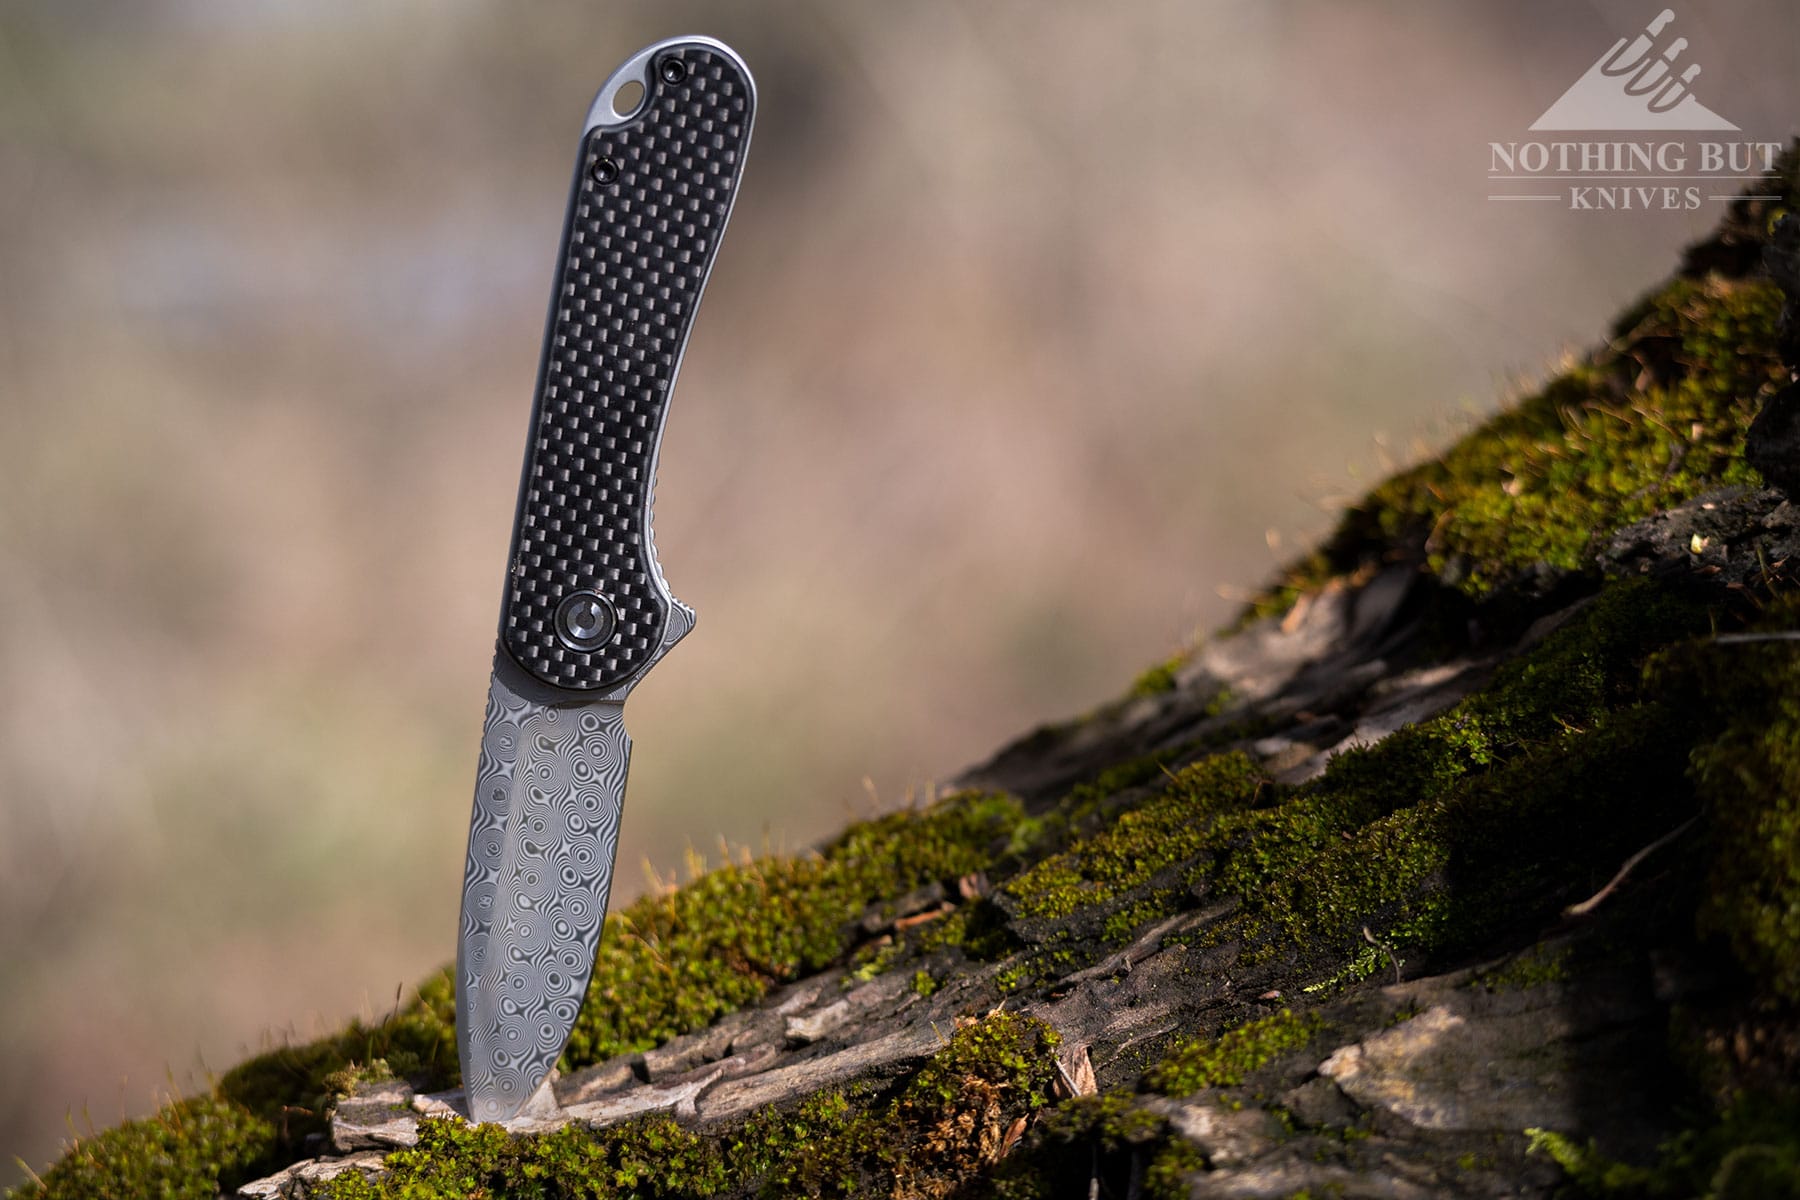 The Civivi Elementum folding knife sticking out of a moss-covered tree branch in front of a blurry, brown background.